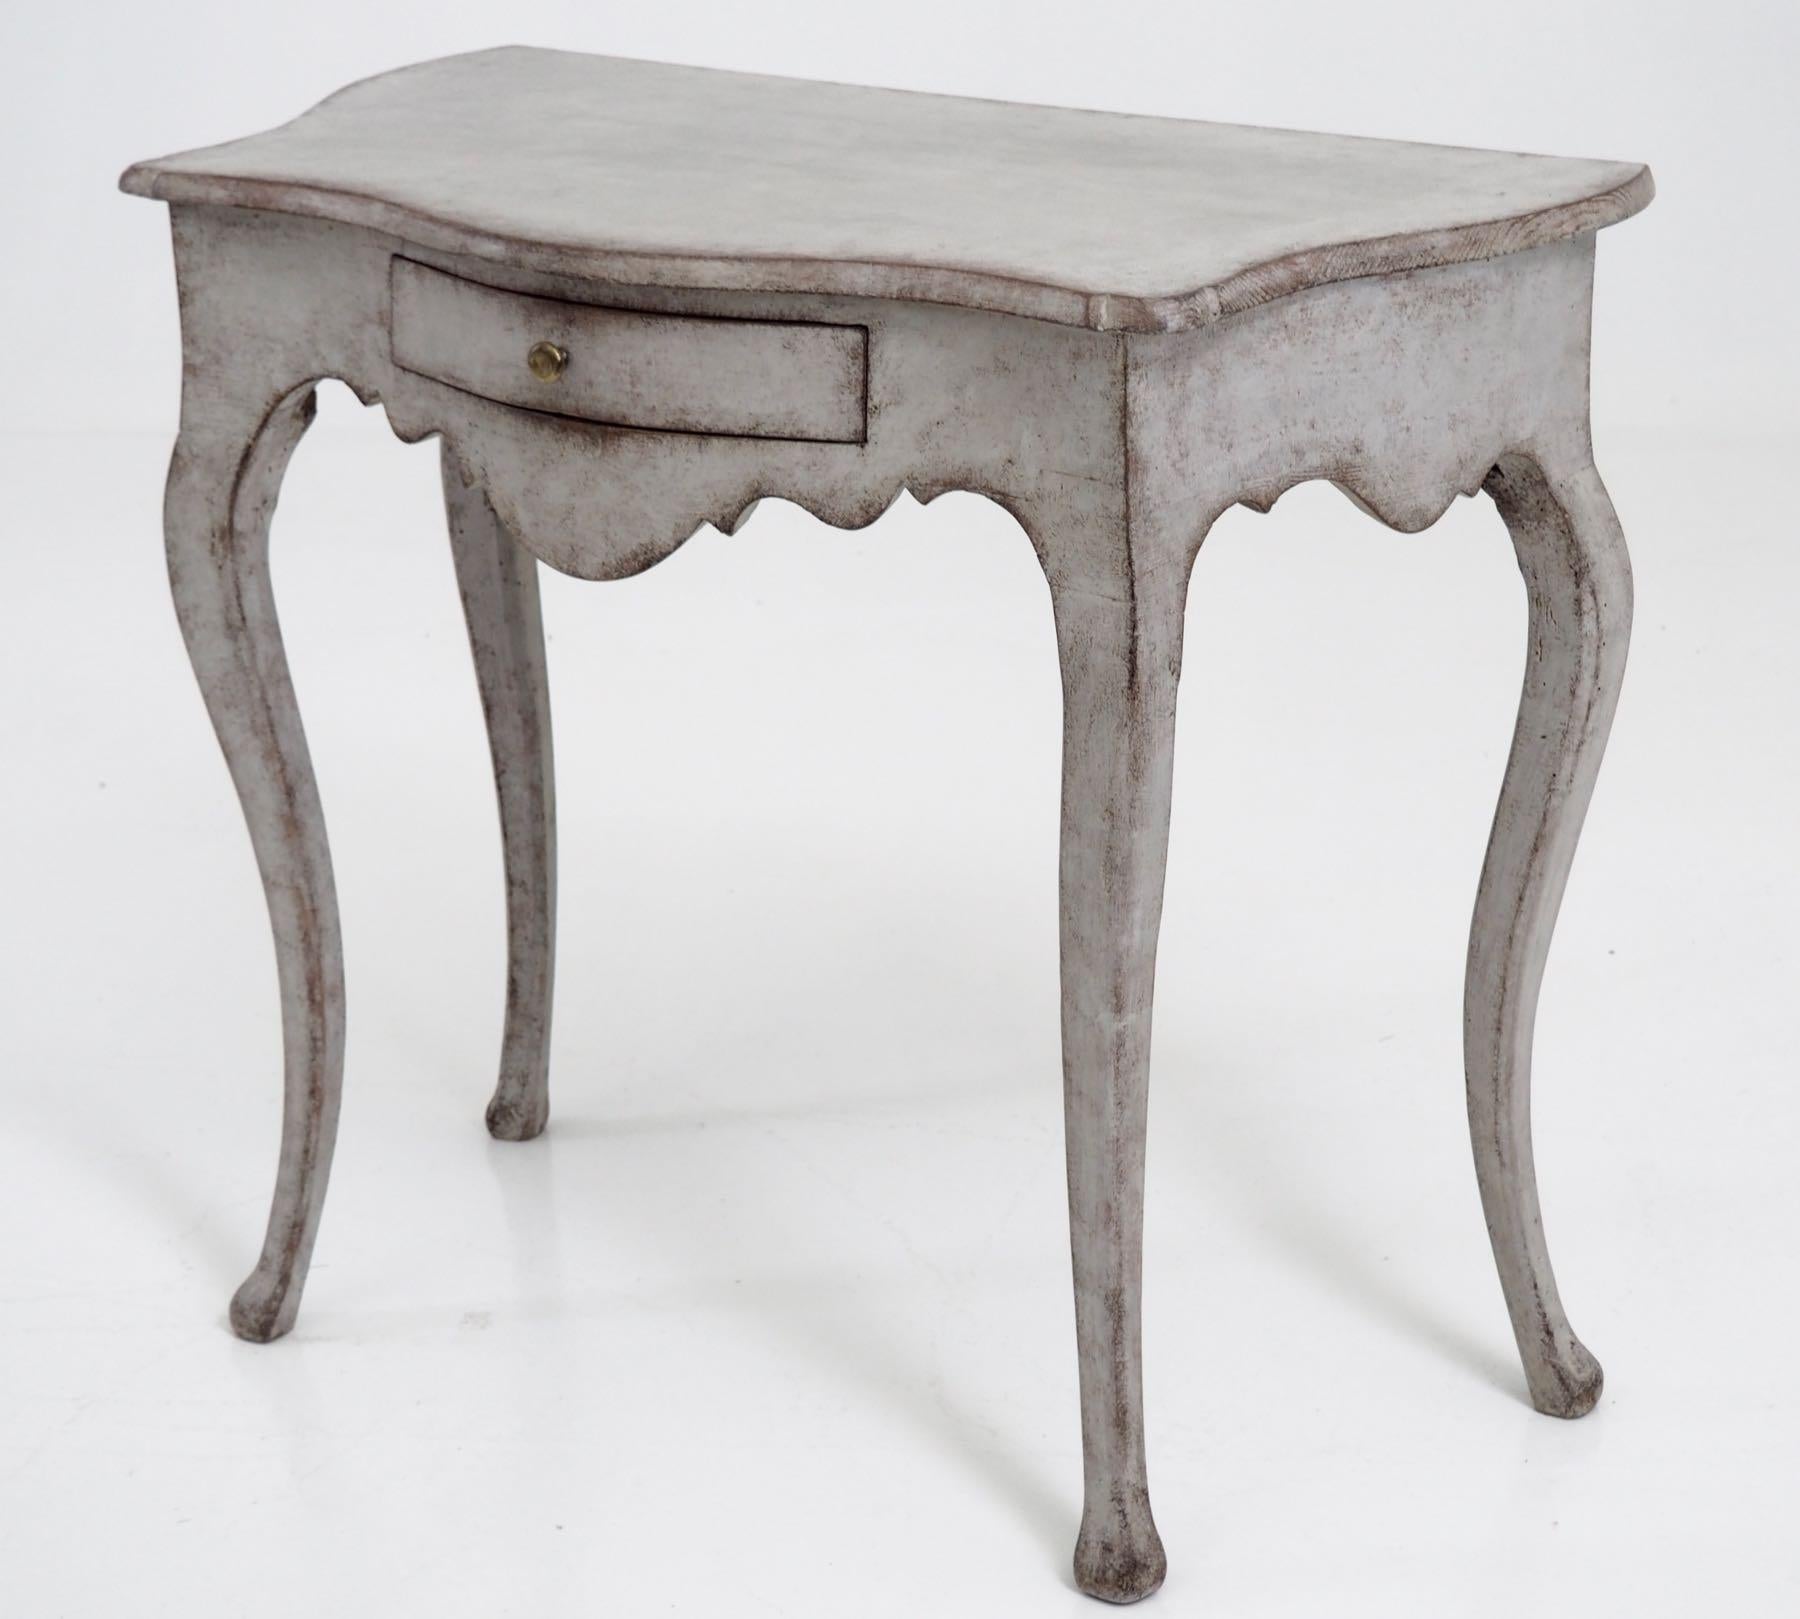 Swedish rococo console table, with one drawer,
18th century.